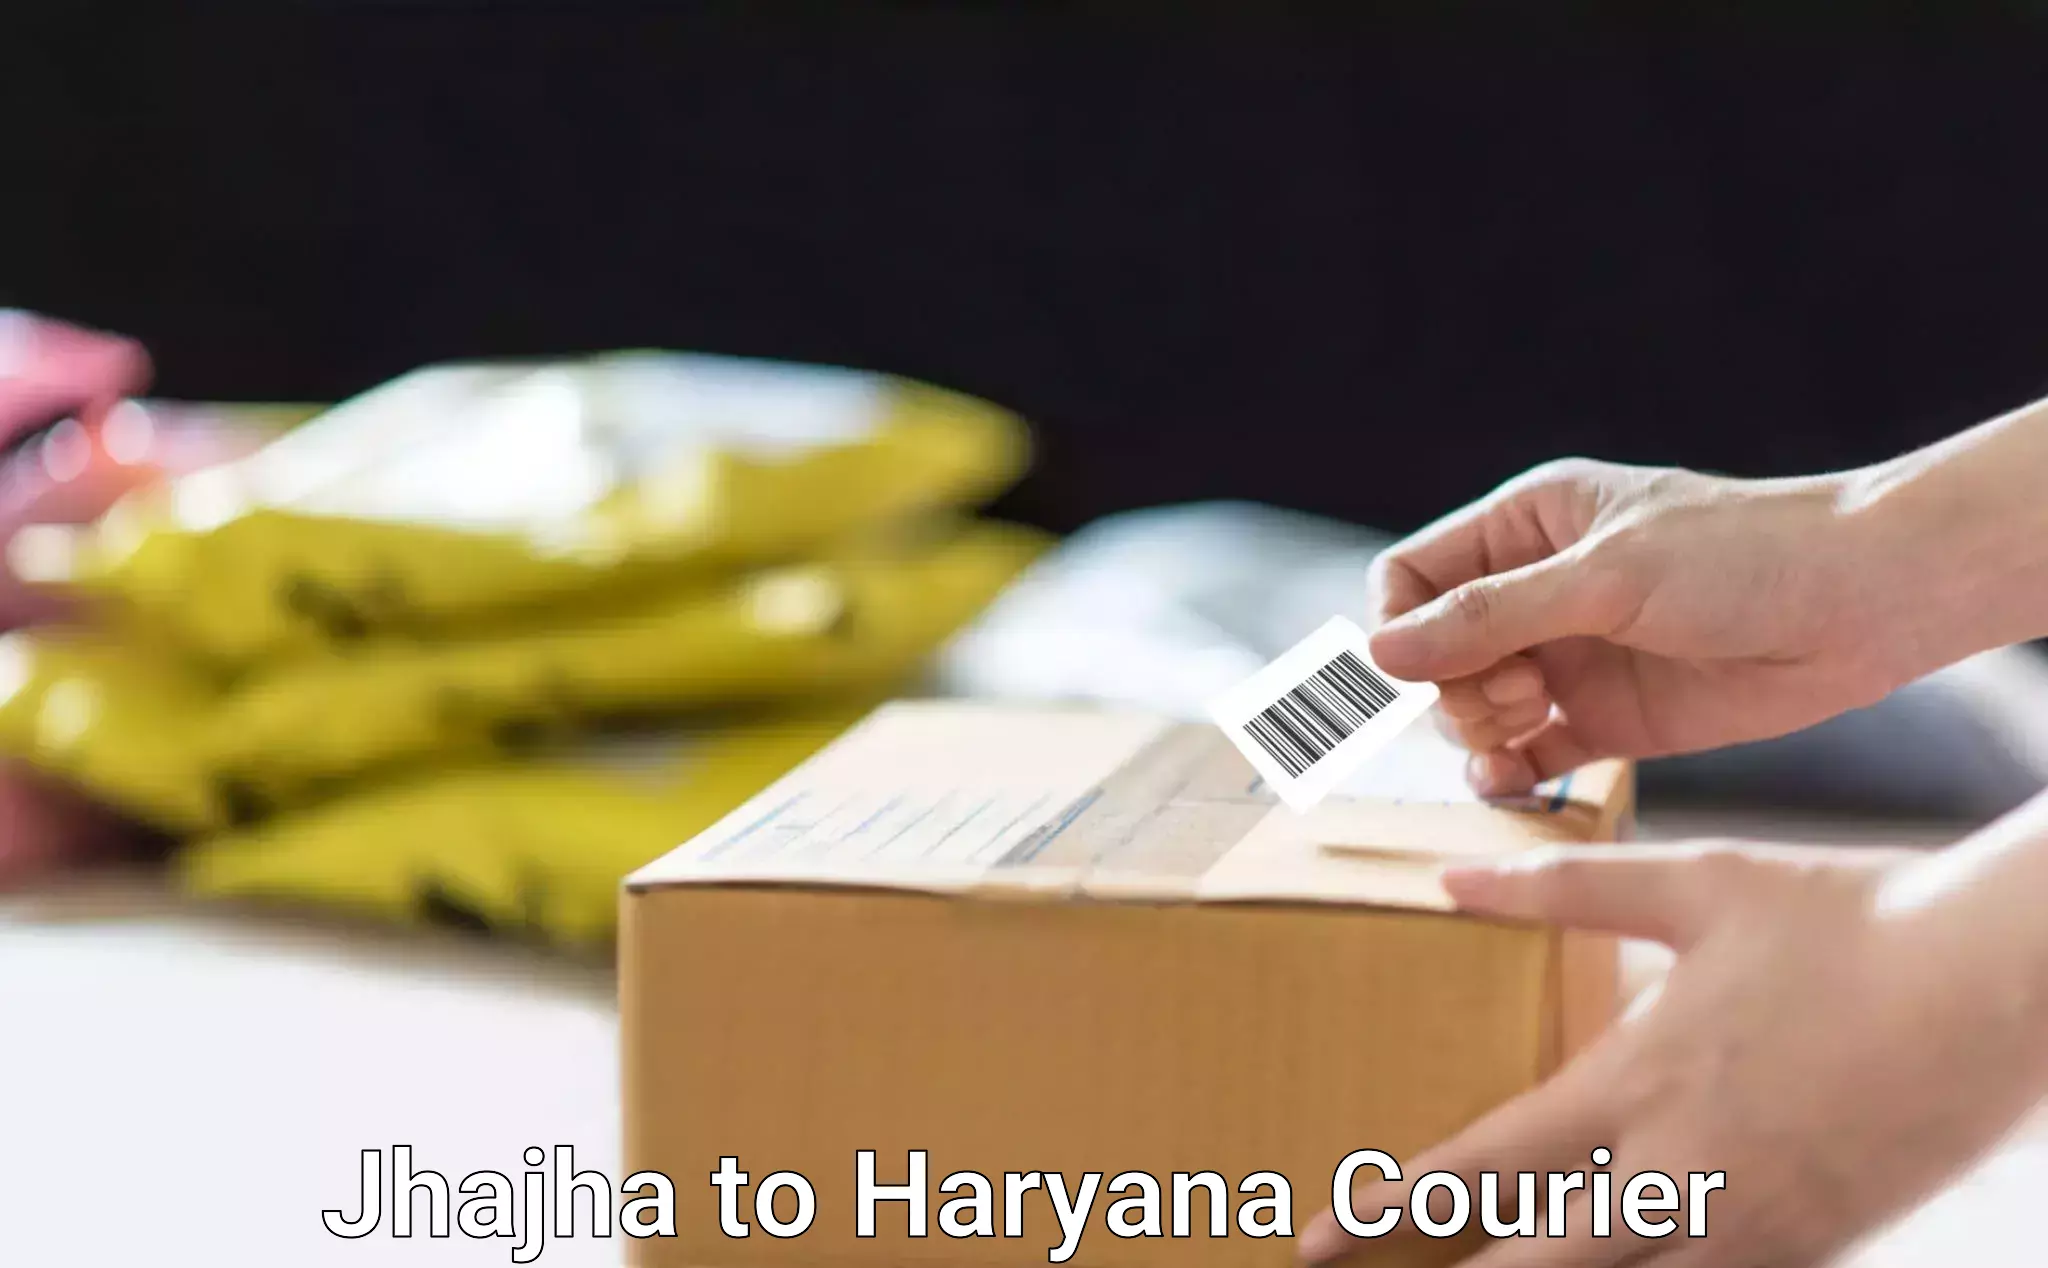 Trusted relocation experts Jhajha to Haryana